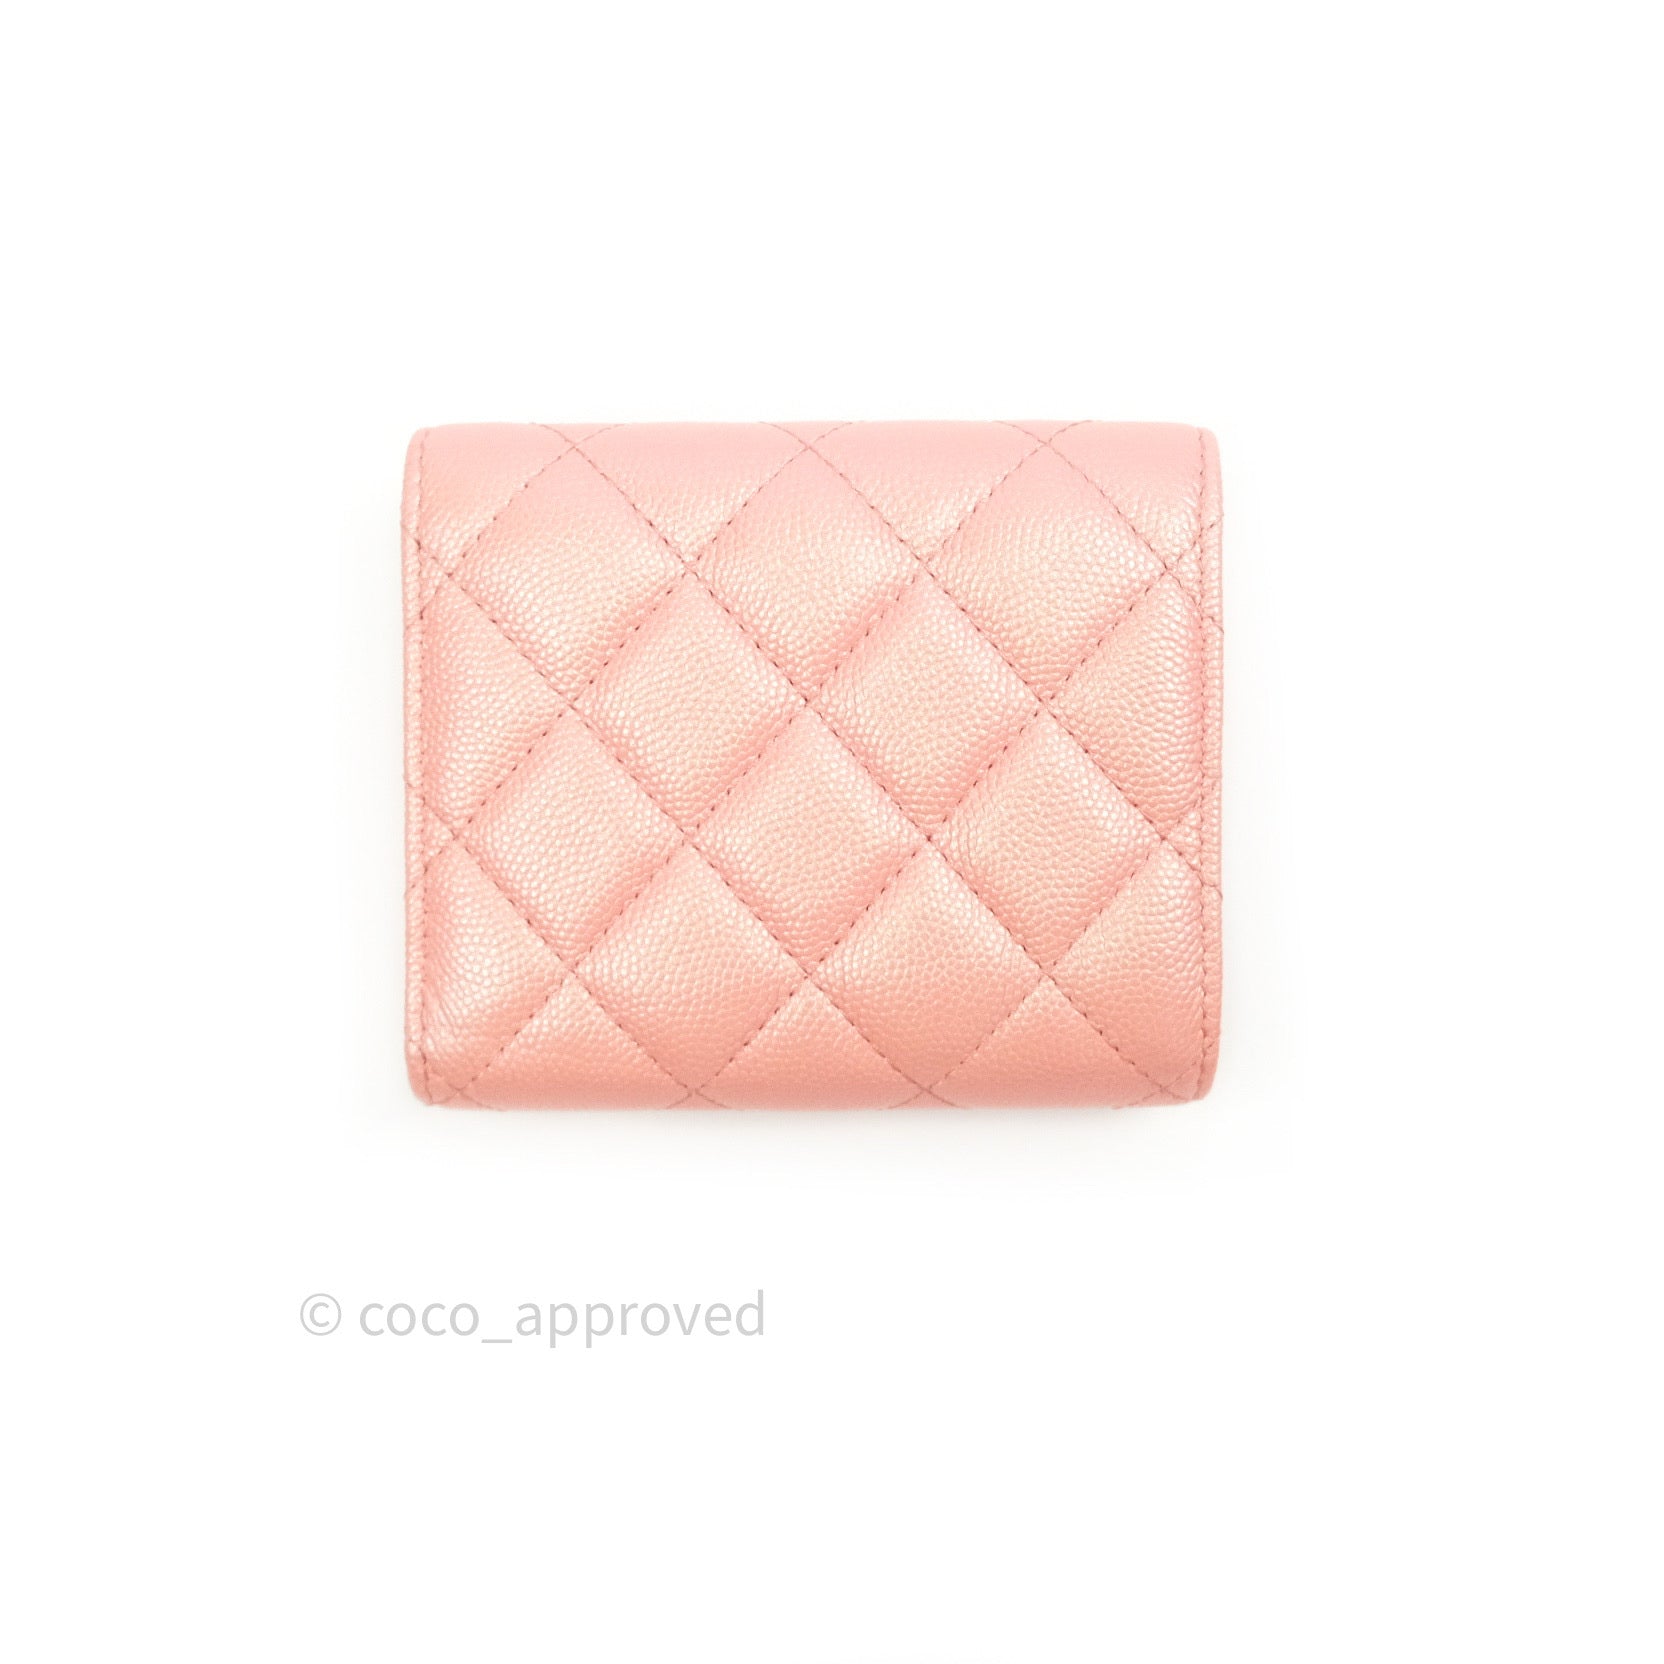 UNBOXING CHANEL CLASSIC SMALL FLAP WALLET (PINK)👛✨#unboxing